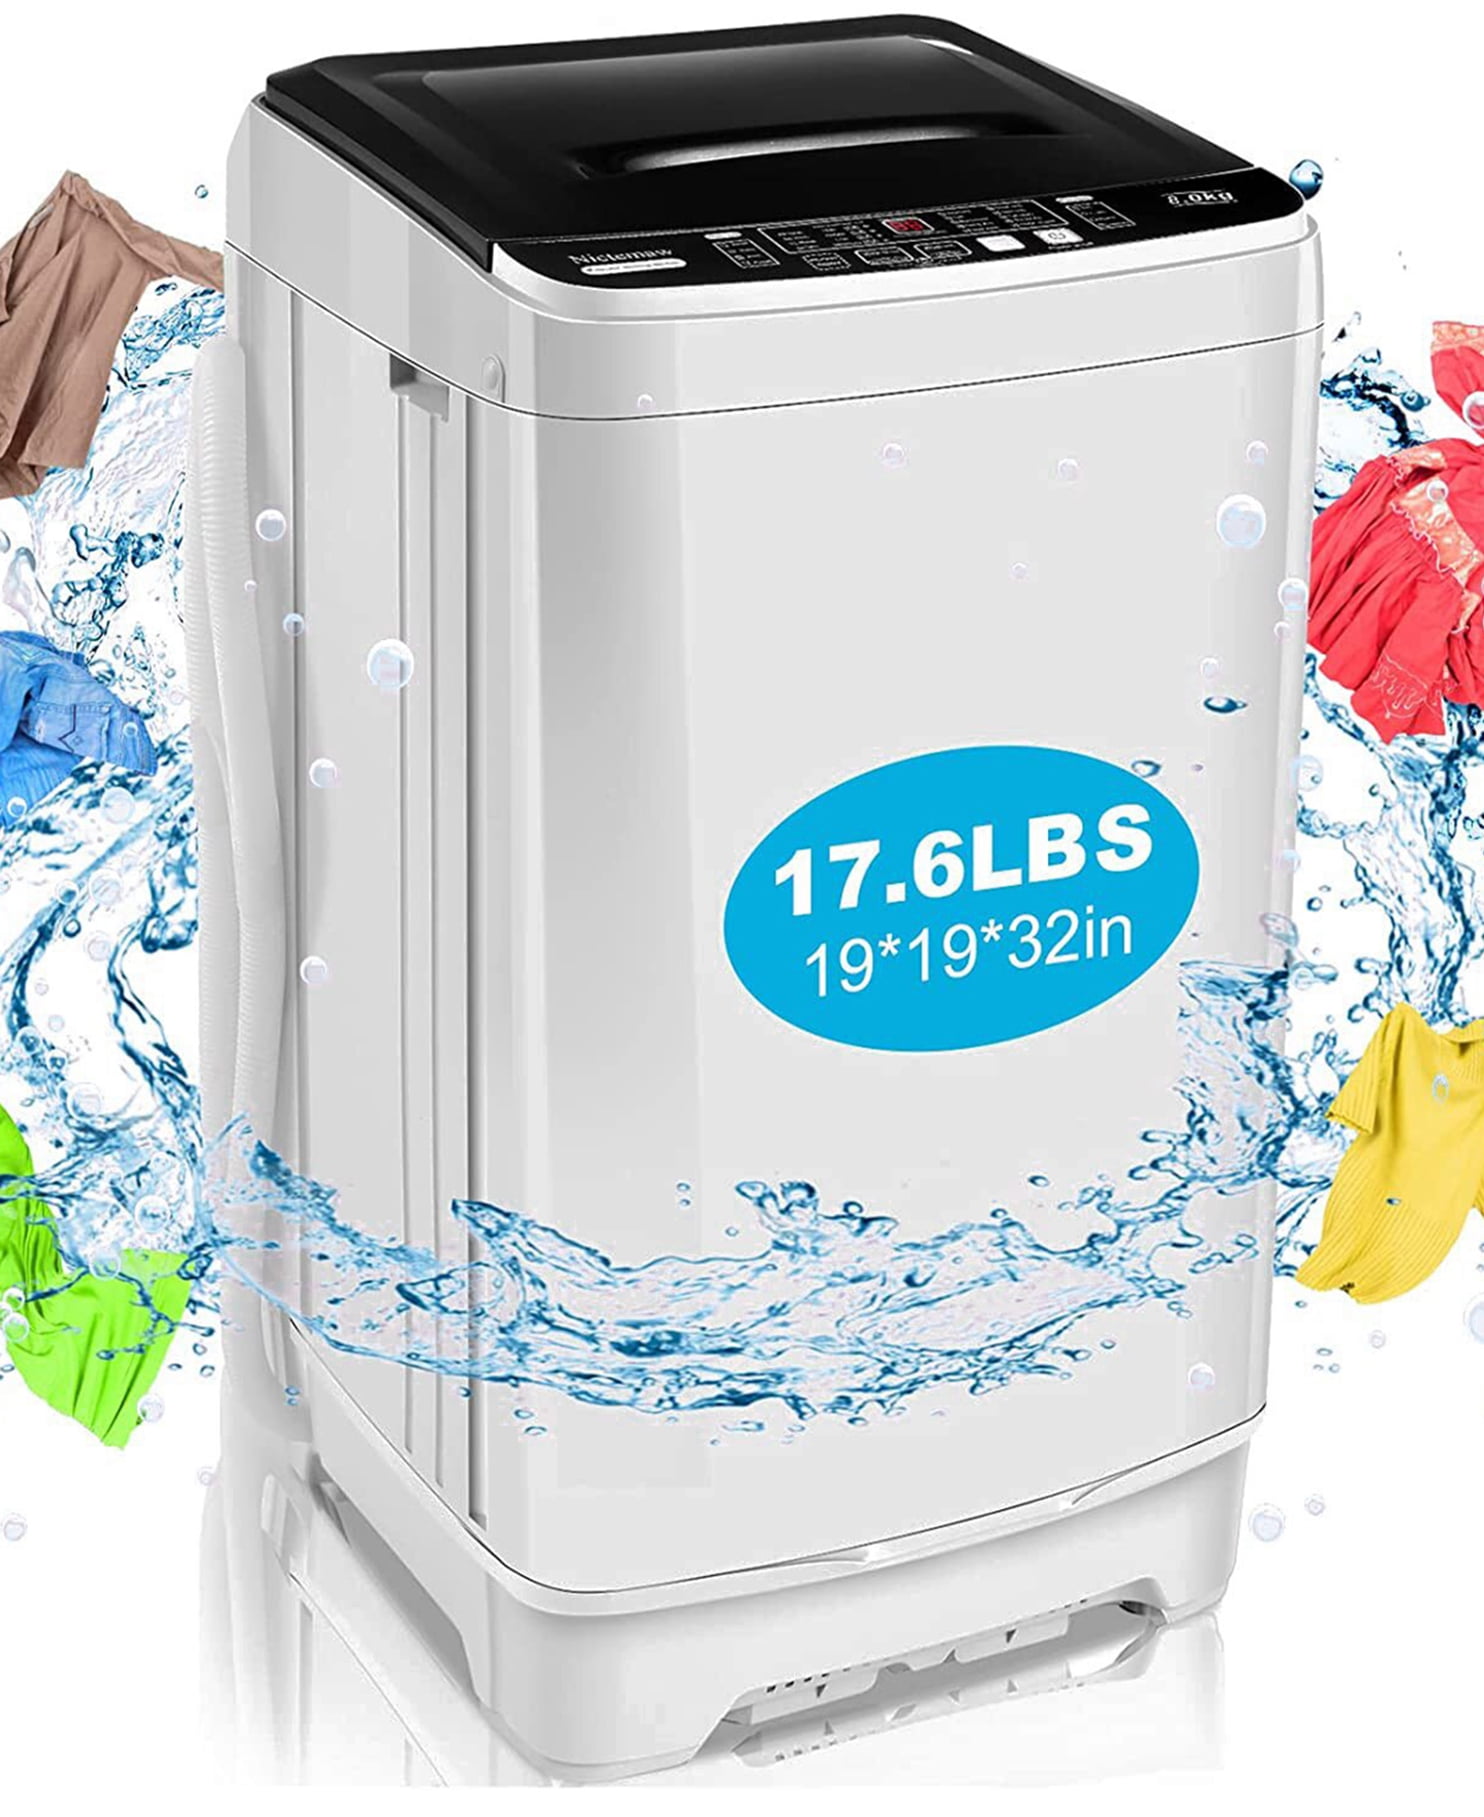 .9 cu. Ft. Portable Washer